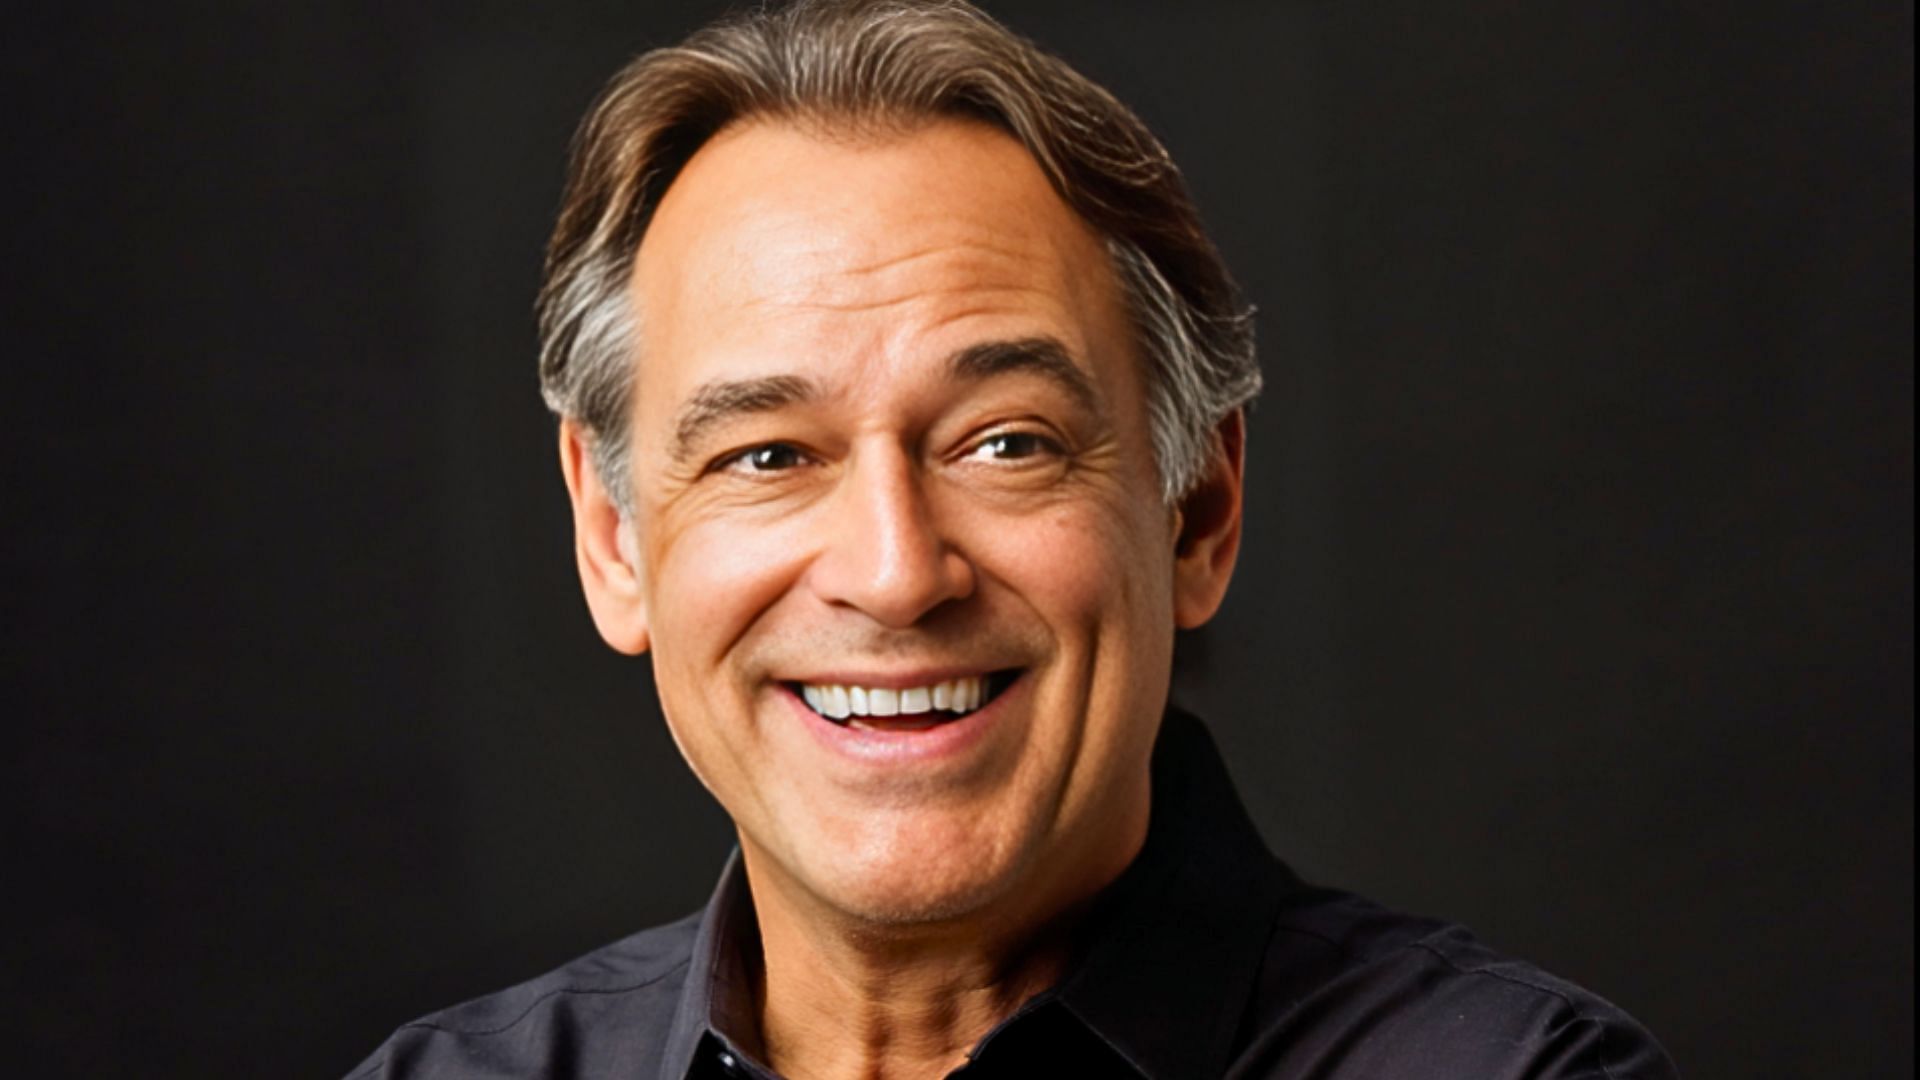 General Hospital actor Jon Lindstrom recently announced that he is parting ways with his wife (Image via Courtney Lindberg - &copy; Jon Lindstrom)